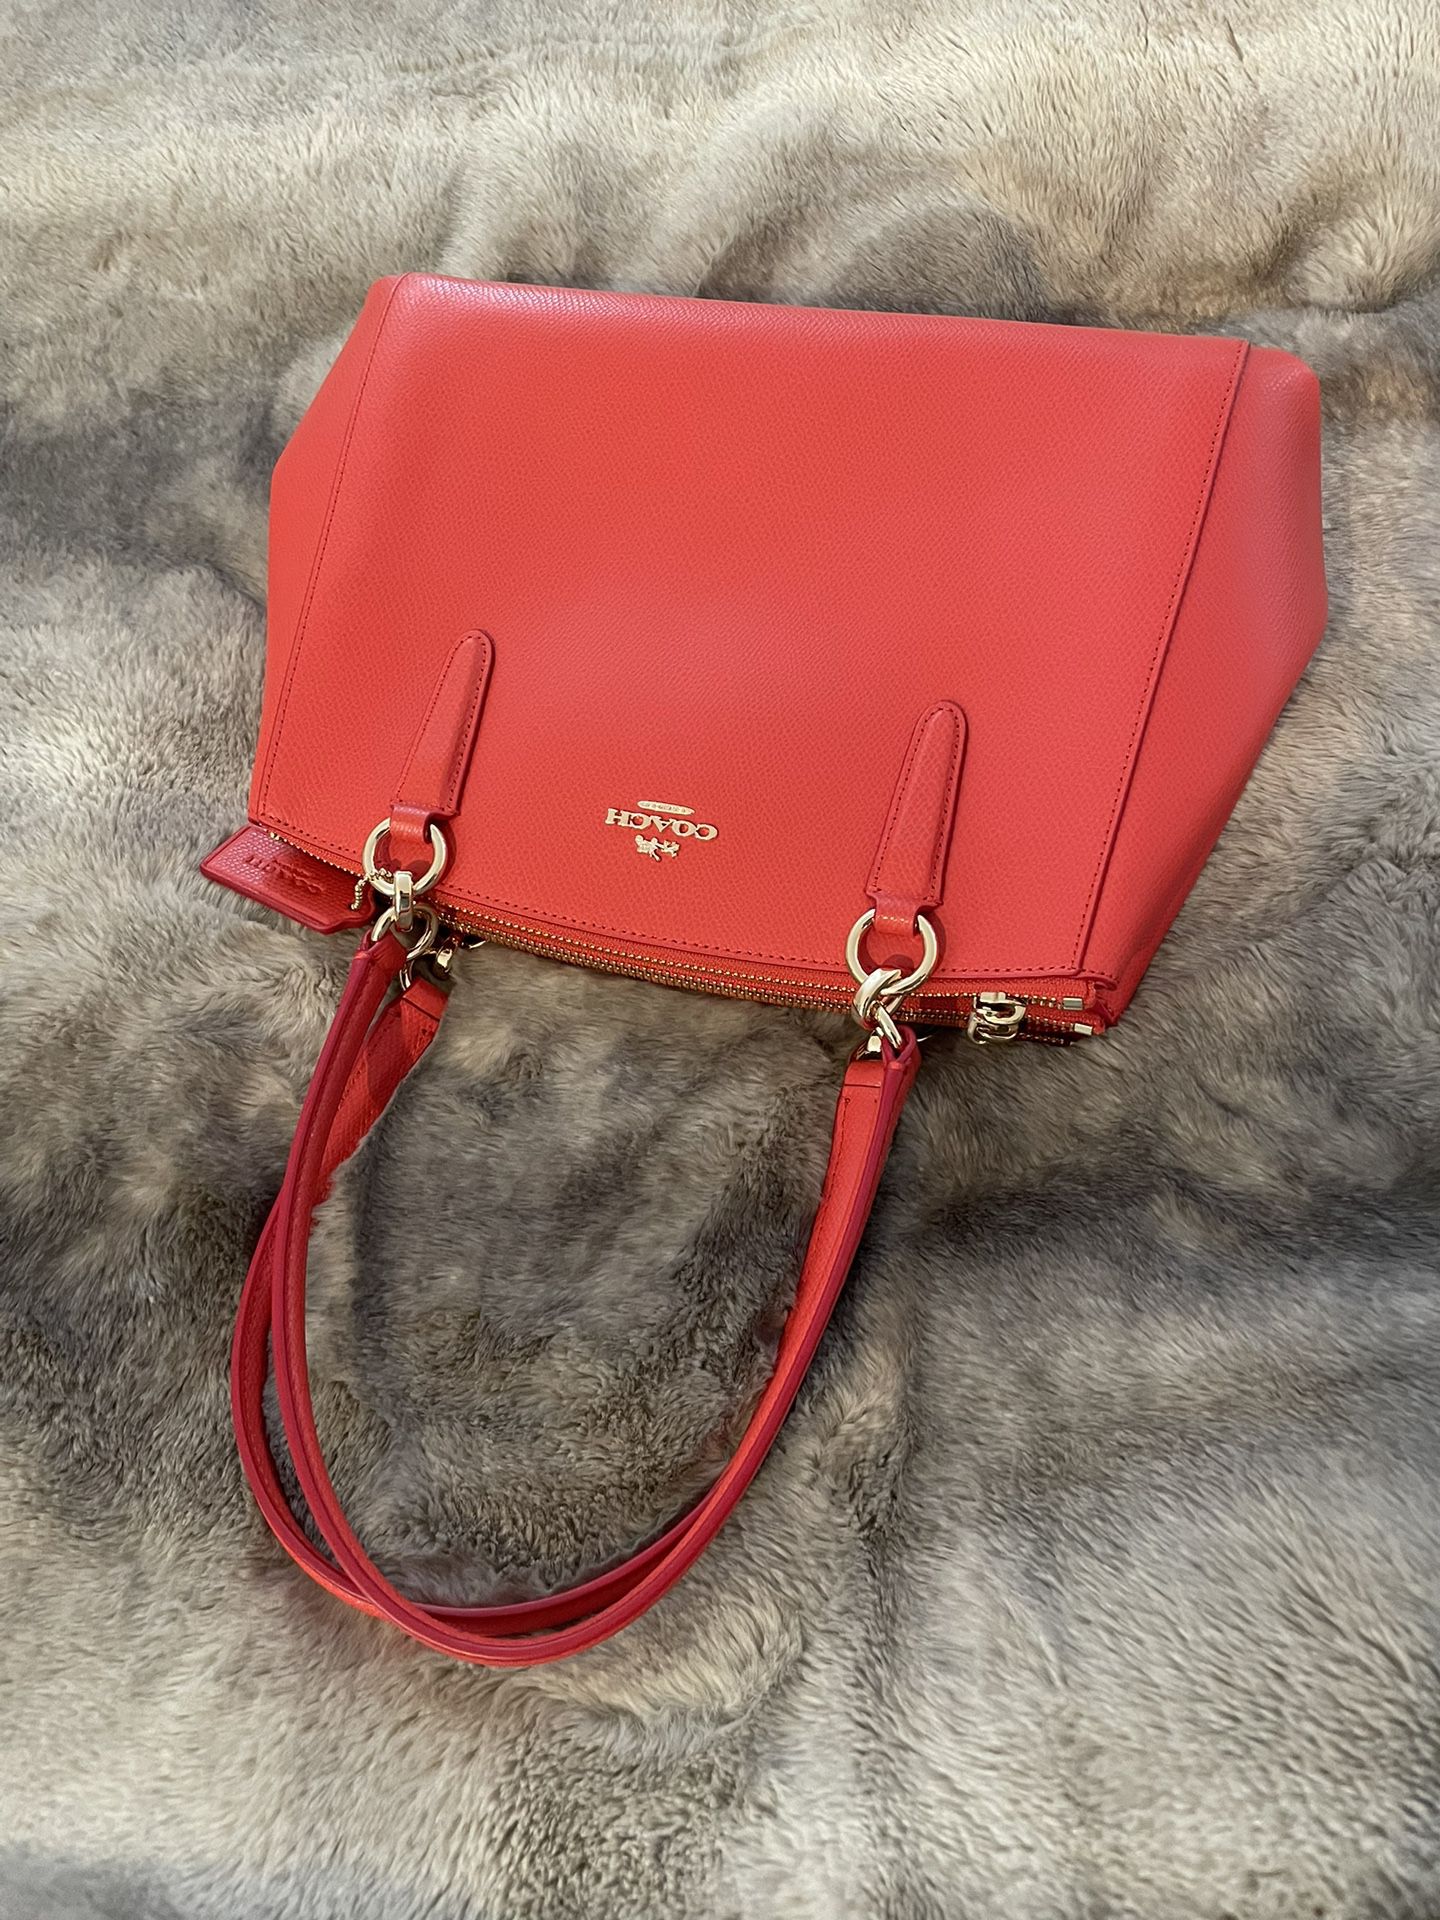 New Coach Christie Satchel In Miami Red Size large 